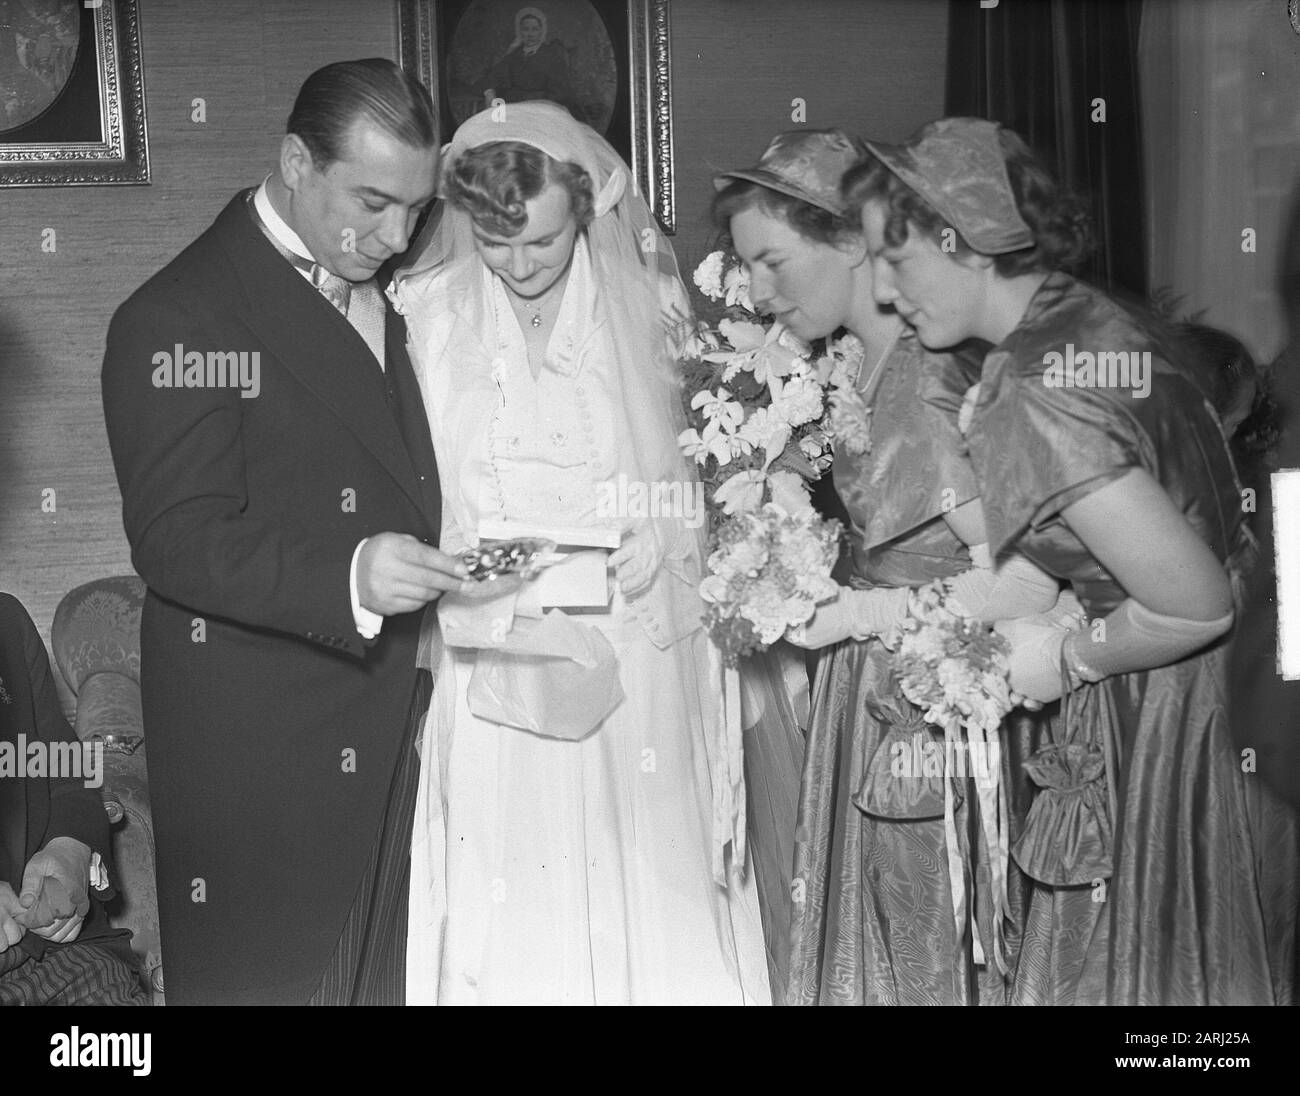 Marriage of Mr. Hans Smulders with Mary Sevenstern. Bridal couple with bridesmaids Annotation: J.P.M.A. Smulders (1912-) was a member of the management Anefo. Mary Sevenstern was a daughter of the owner of the distillery Sevenstern in Dieren Date: 4 January 1951 Location: Animals Keywords: bridal couples, marriages Personal name: Sevenstern, M., Smulders, J.P.M.A. Stock Photo